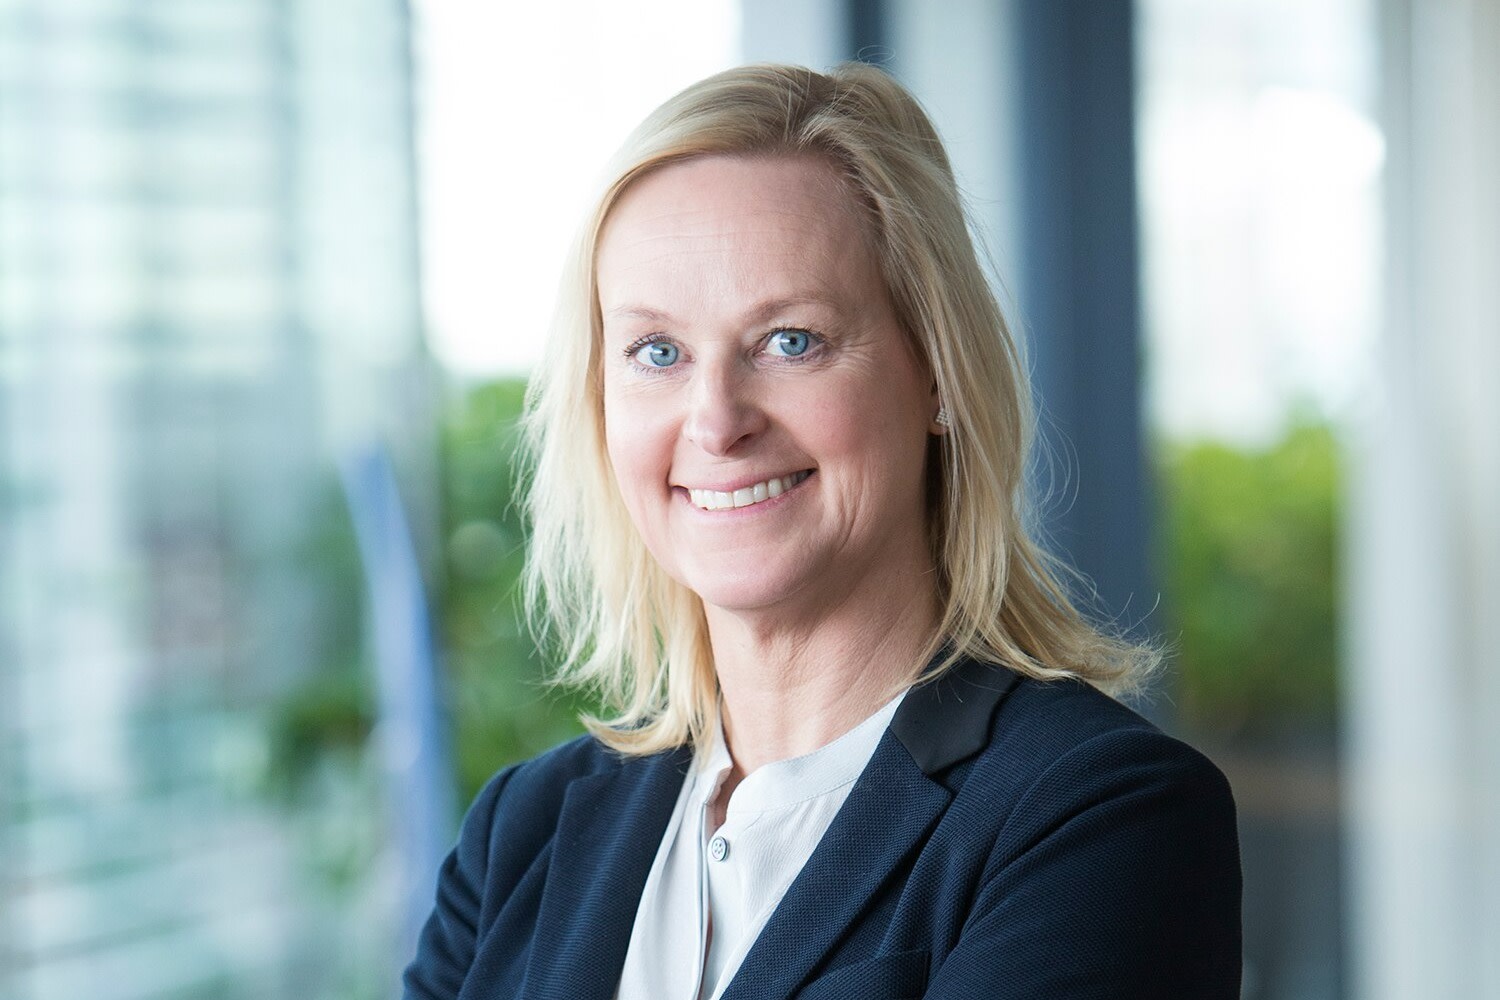 Electrolux has appointed Anna Ohlsson-Leijon as new Chief Commercial Officer